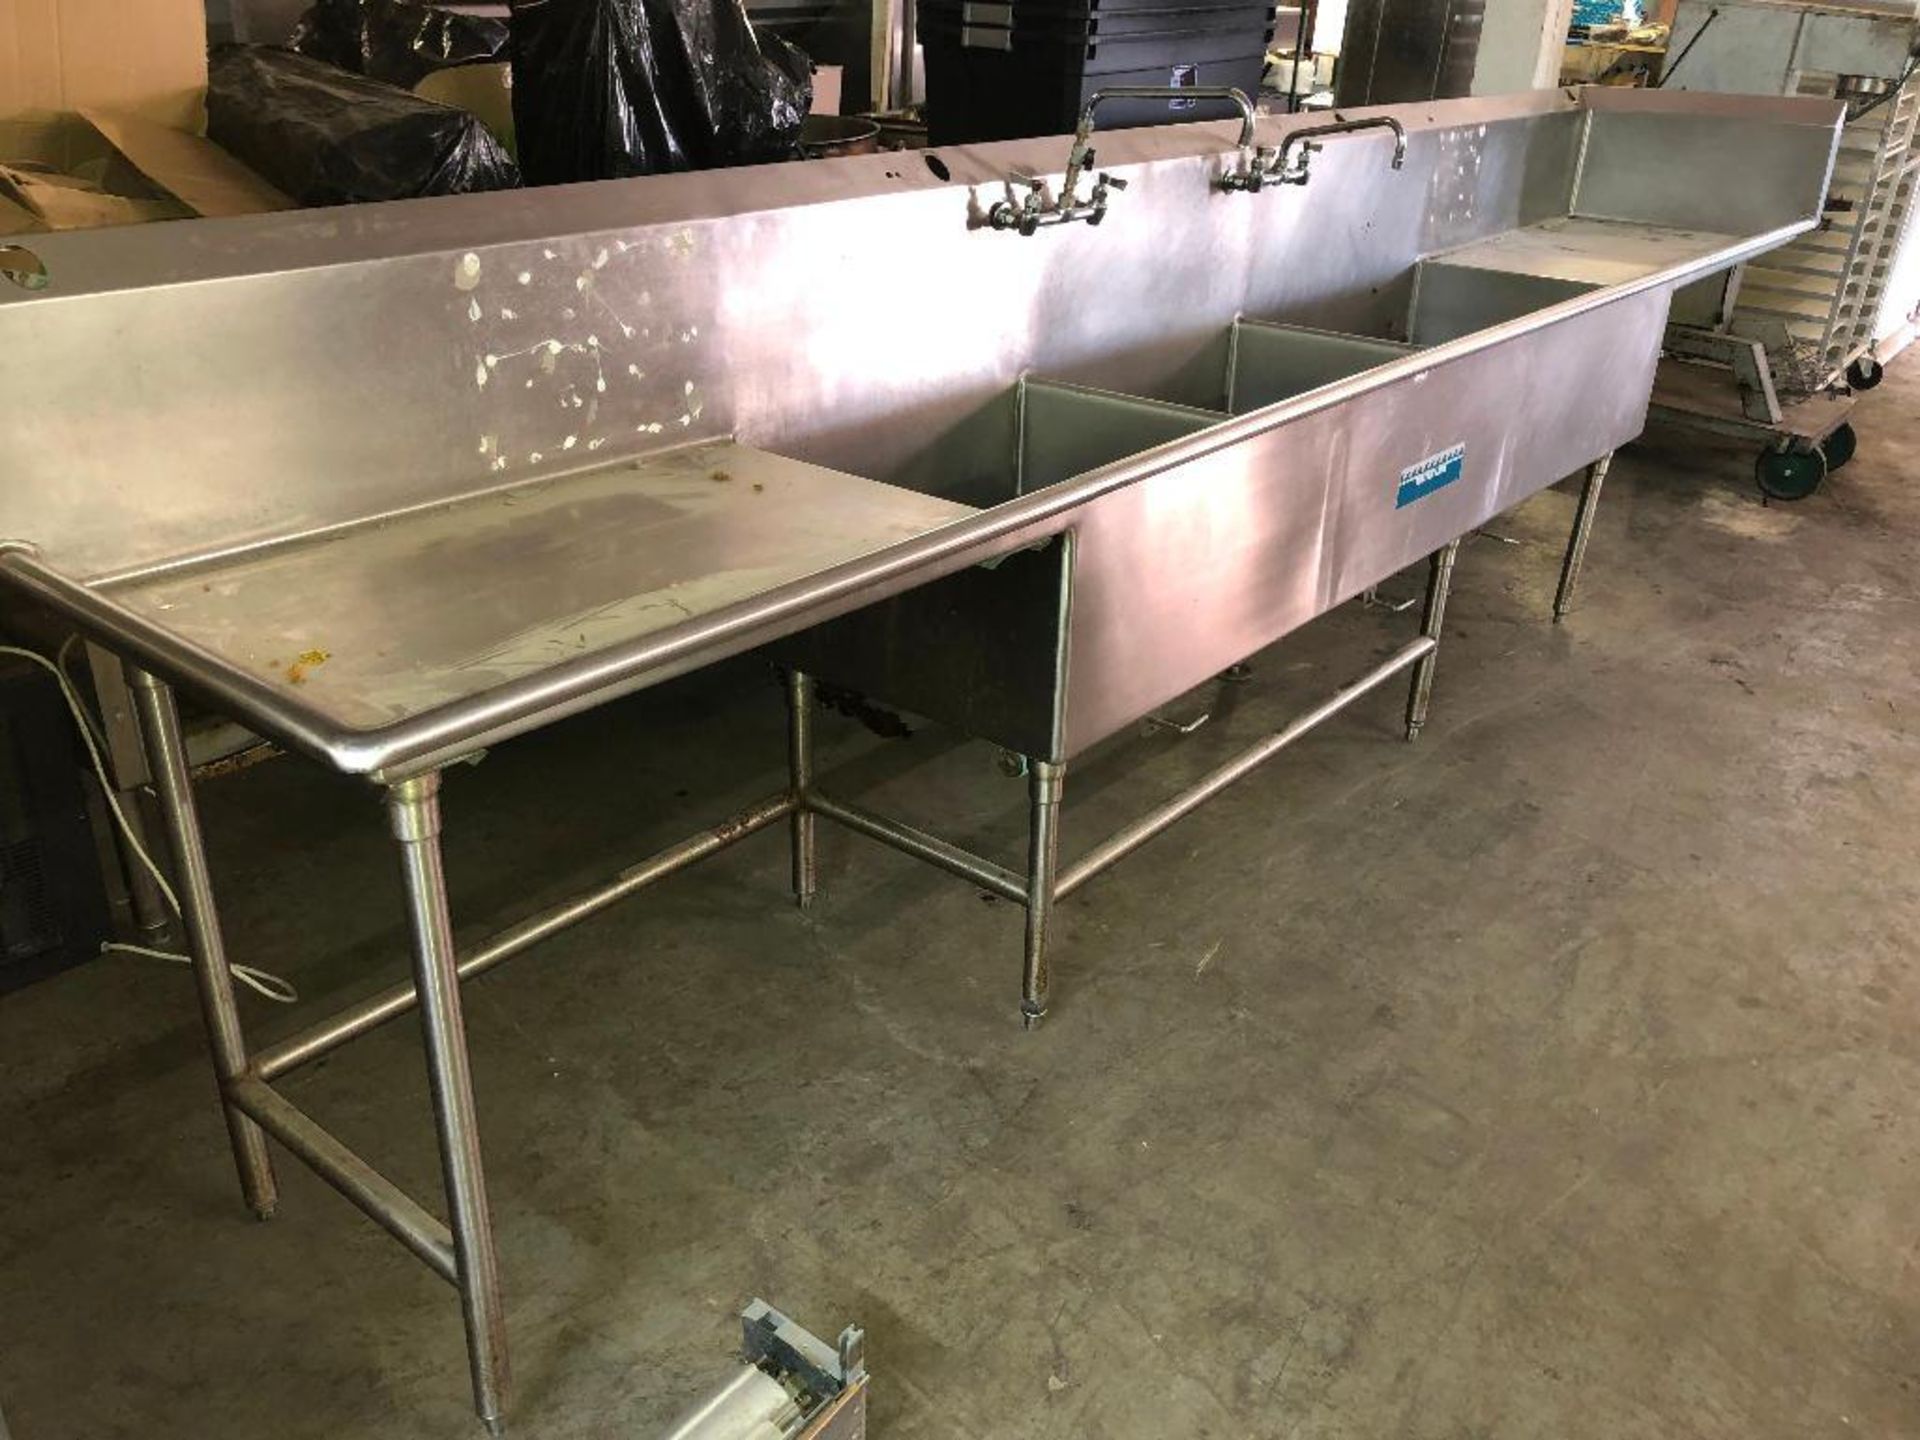 DESCRIPTION: 14' THREE WELL STAINLESS POT SINK W/ LEFT AND RIGHT DRY BOARDS ADDITIONAL INFORMATION: